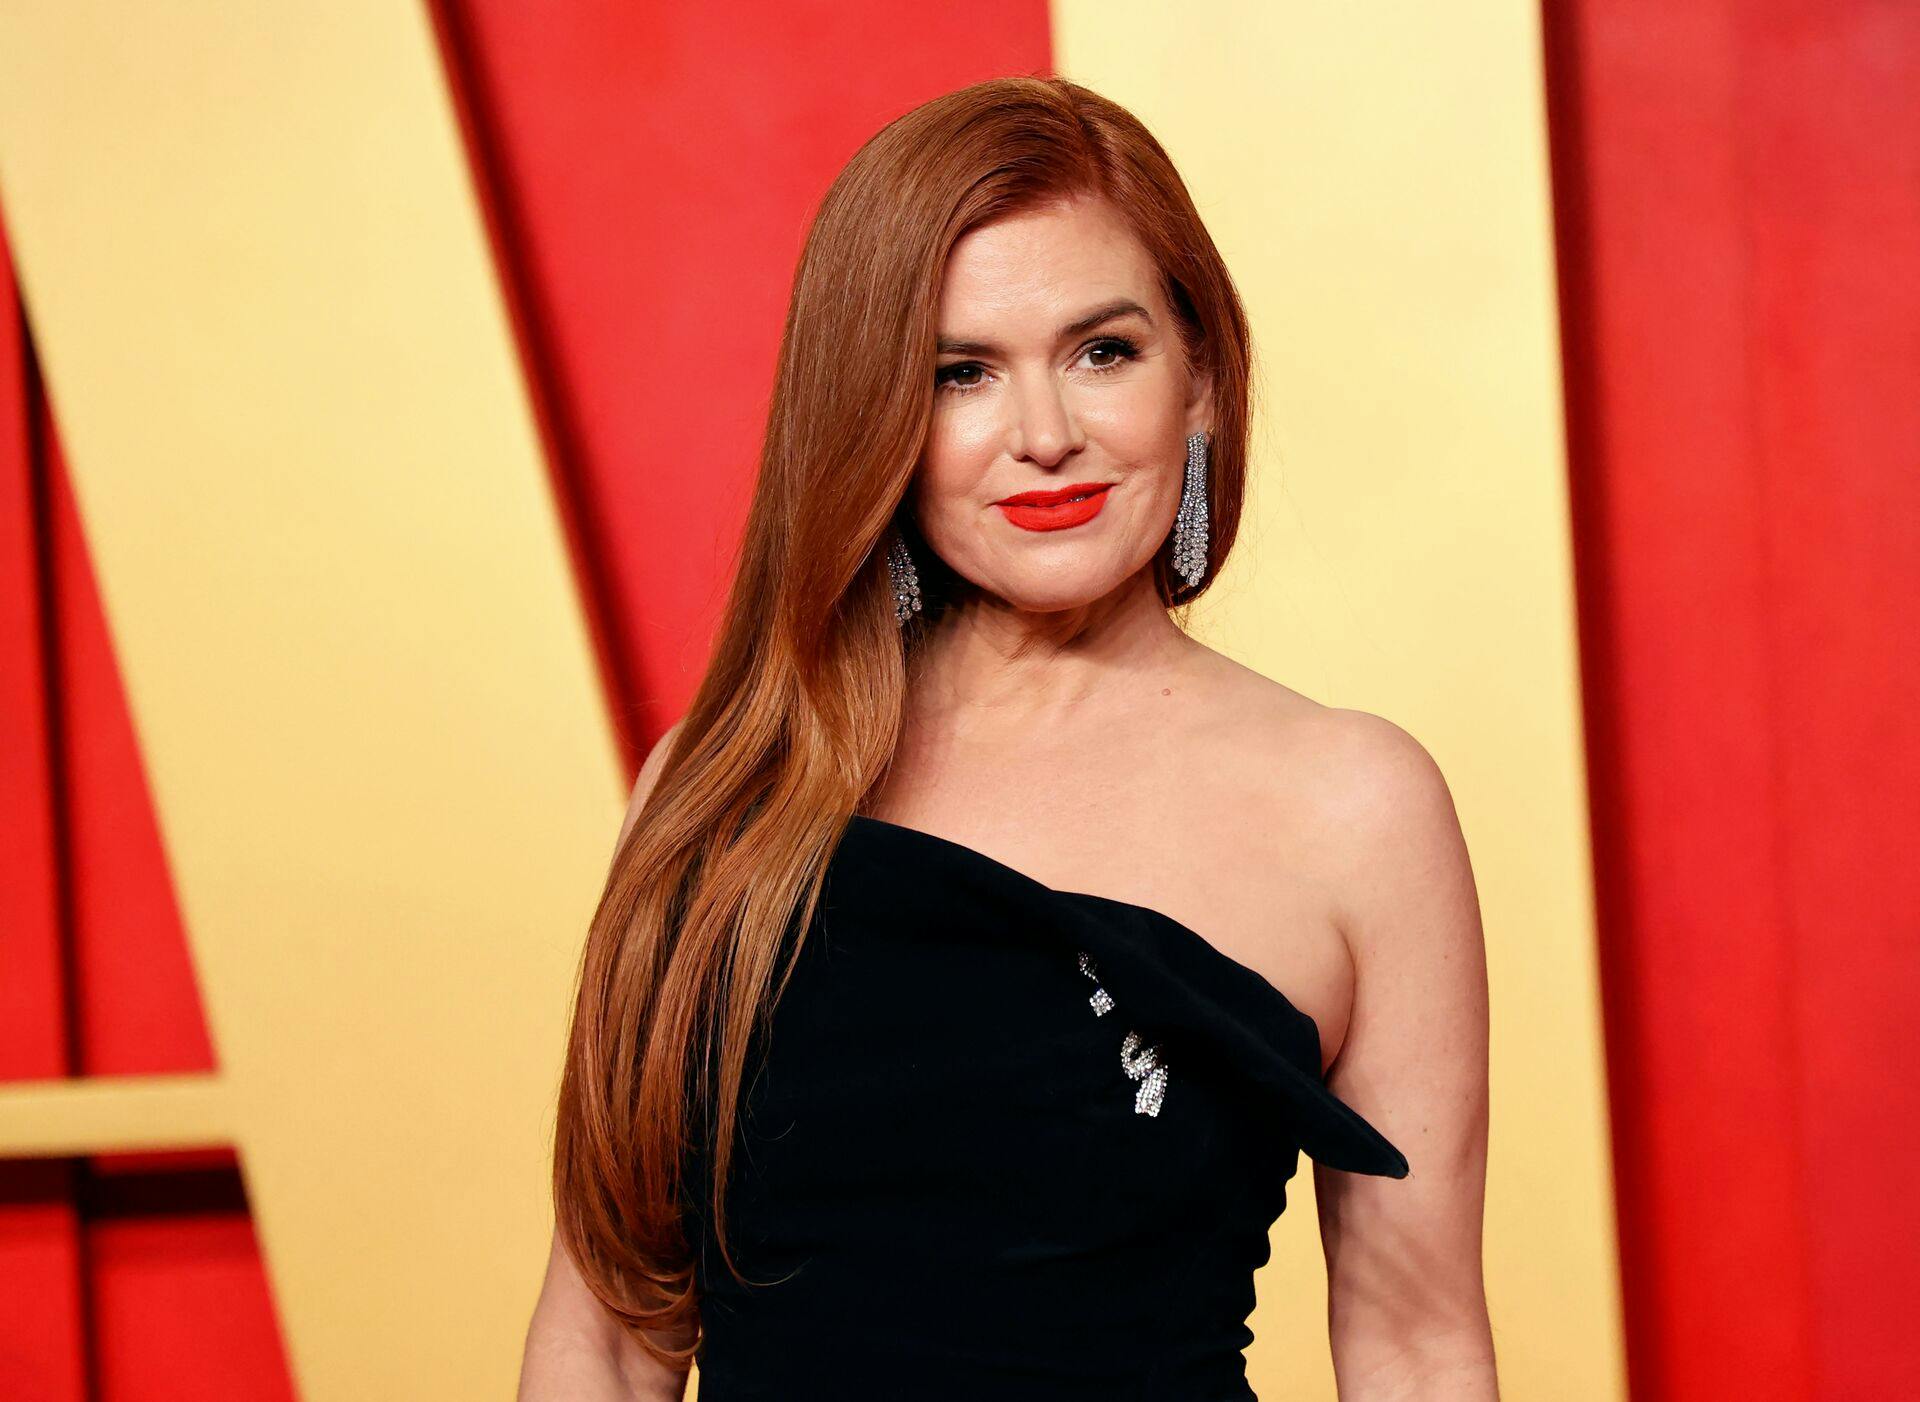 Actress Isla Fisher attends the Vanity Fair Oscars Party at the Wallis Annenberg Center for the Performing Arts in Beverly Hills, California, on March 10, 2024. (Photo by Michael TRAN / AFP)